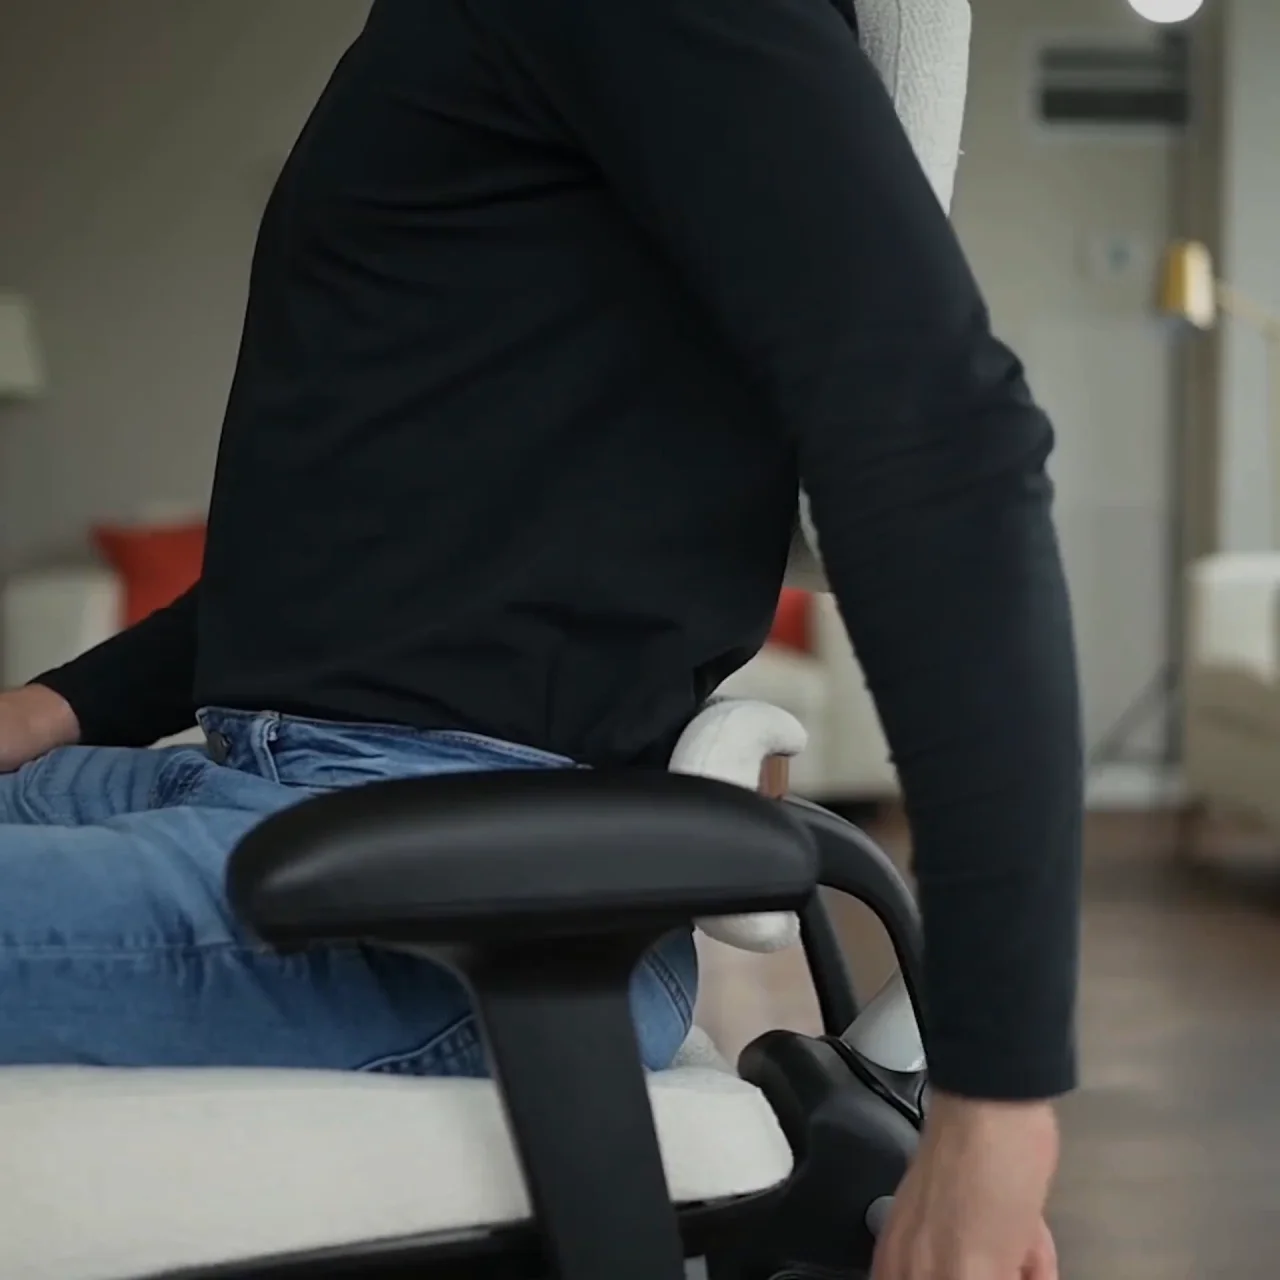 Understanding The Origin of Piriformis Syndrome and Sitting